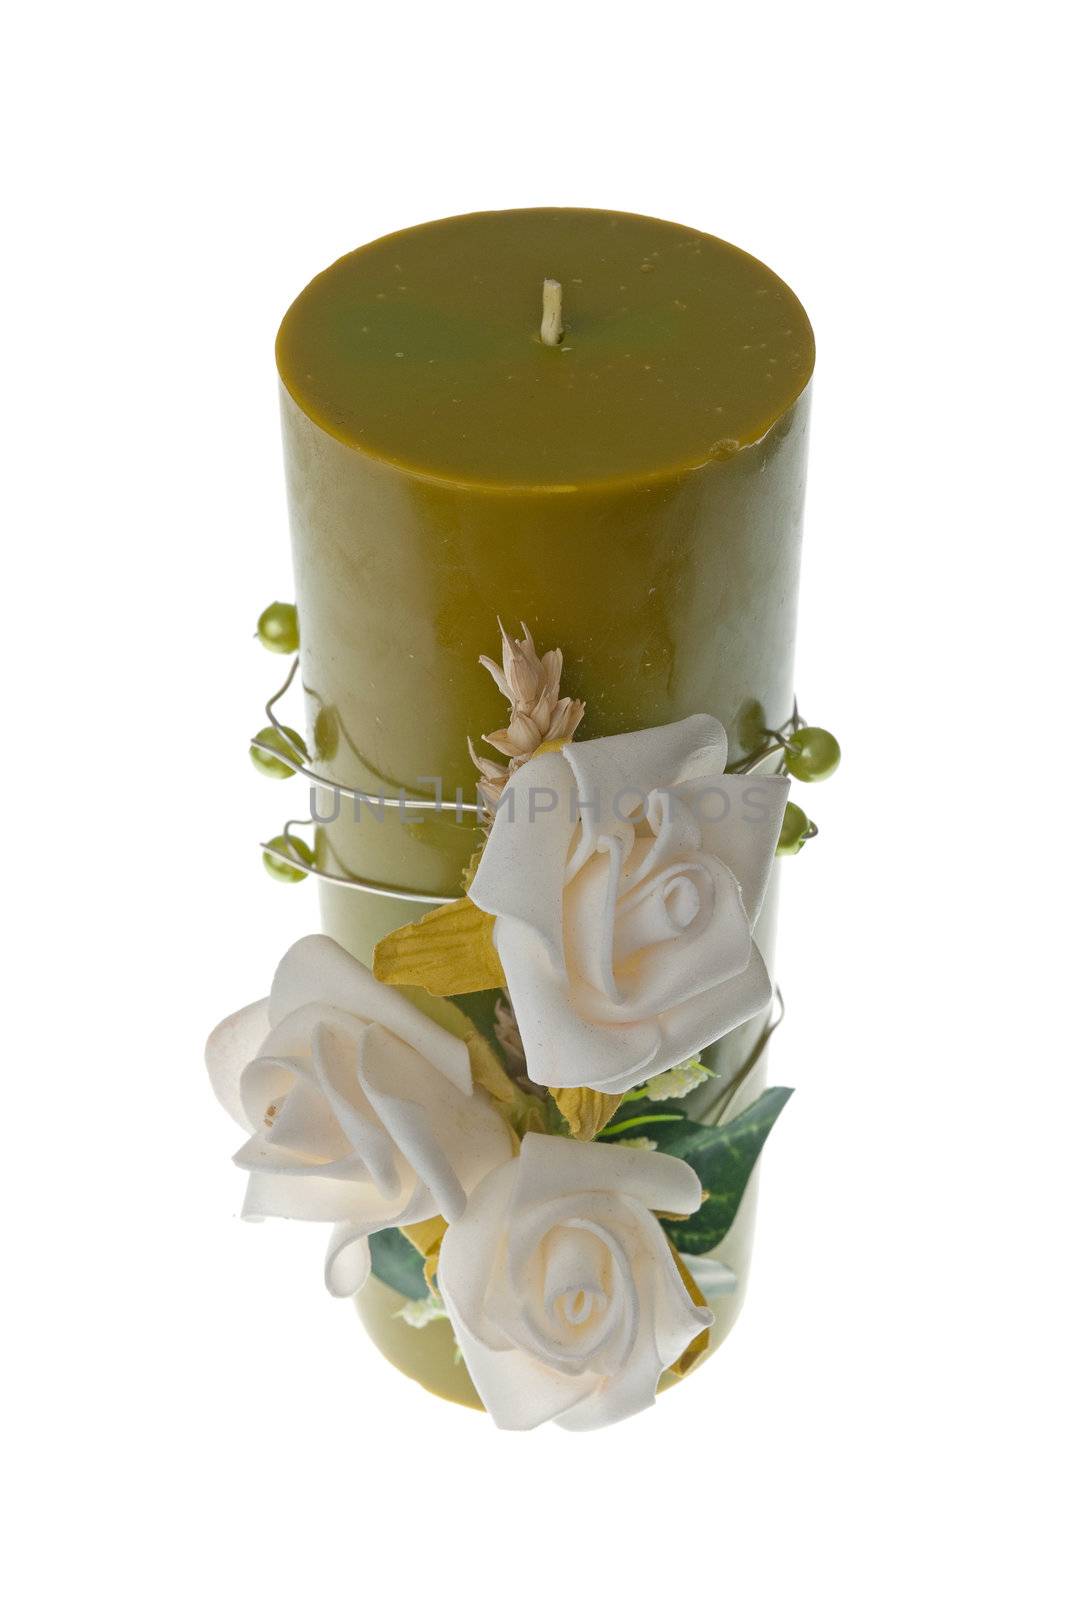 Large green candle with the flower decoration isolated on white background.